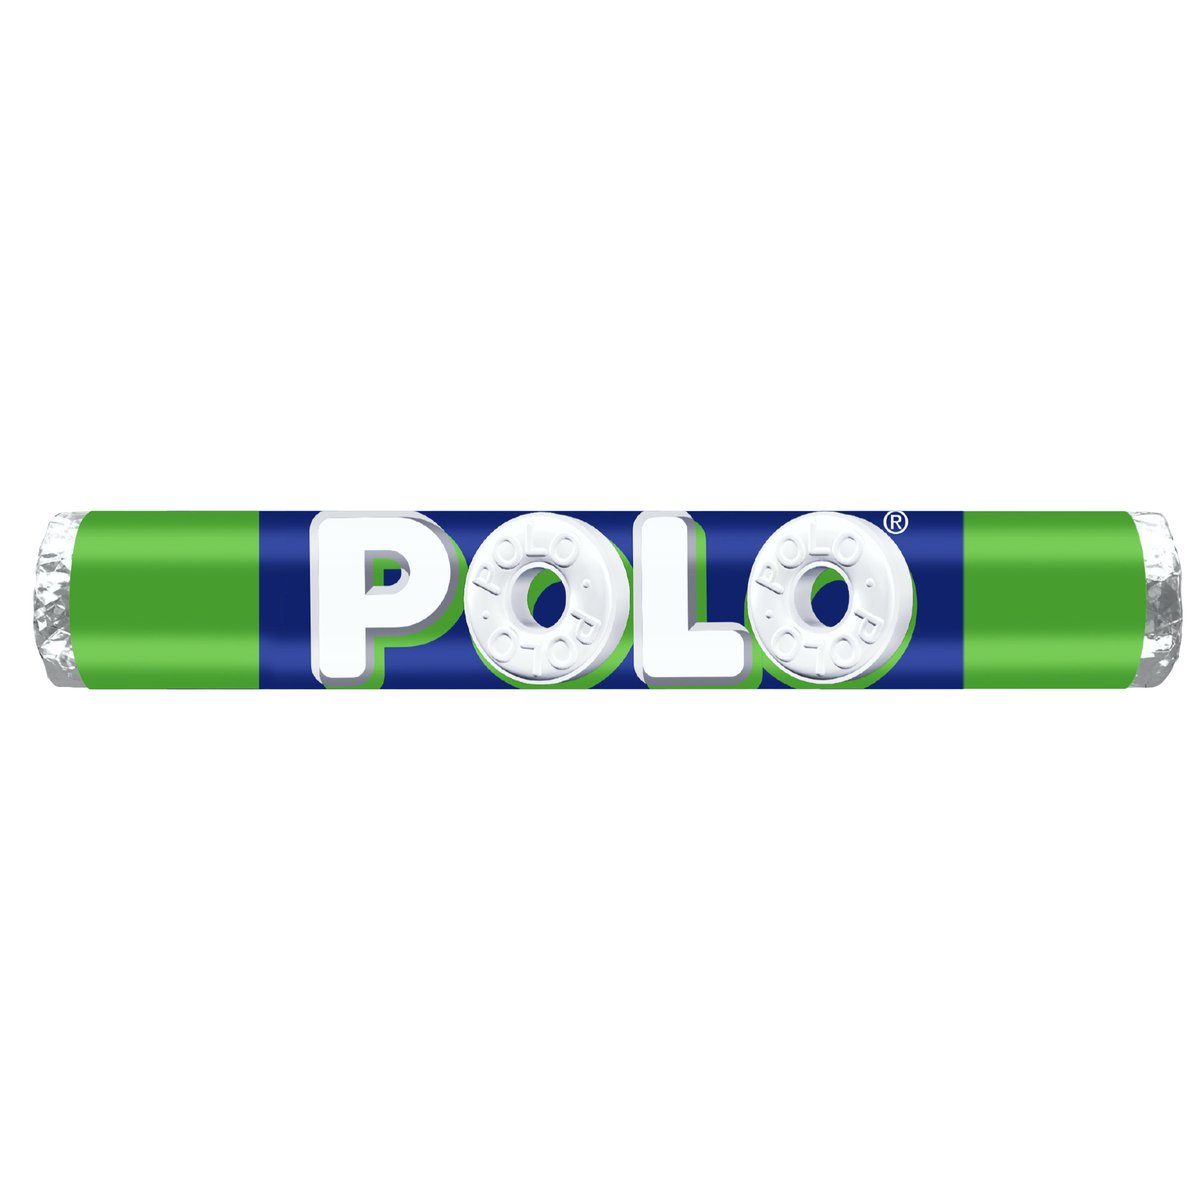 Nestle Polo Mint and Menthol Candy 23 x 15 g